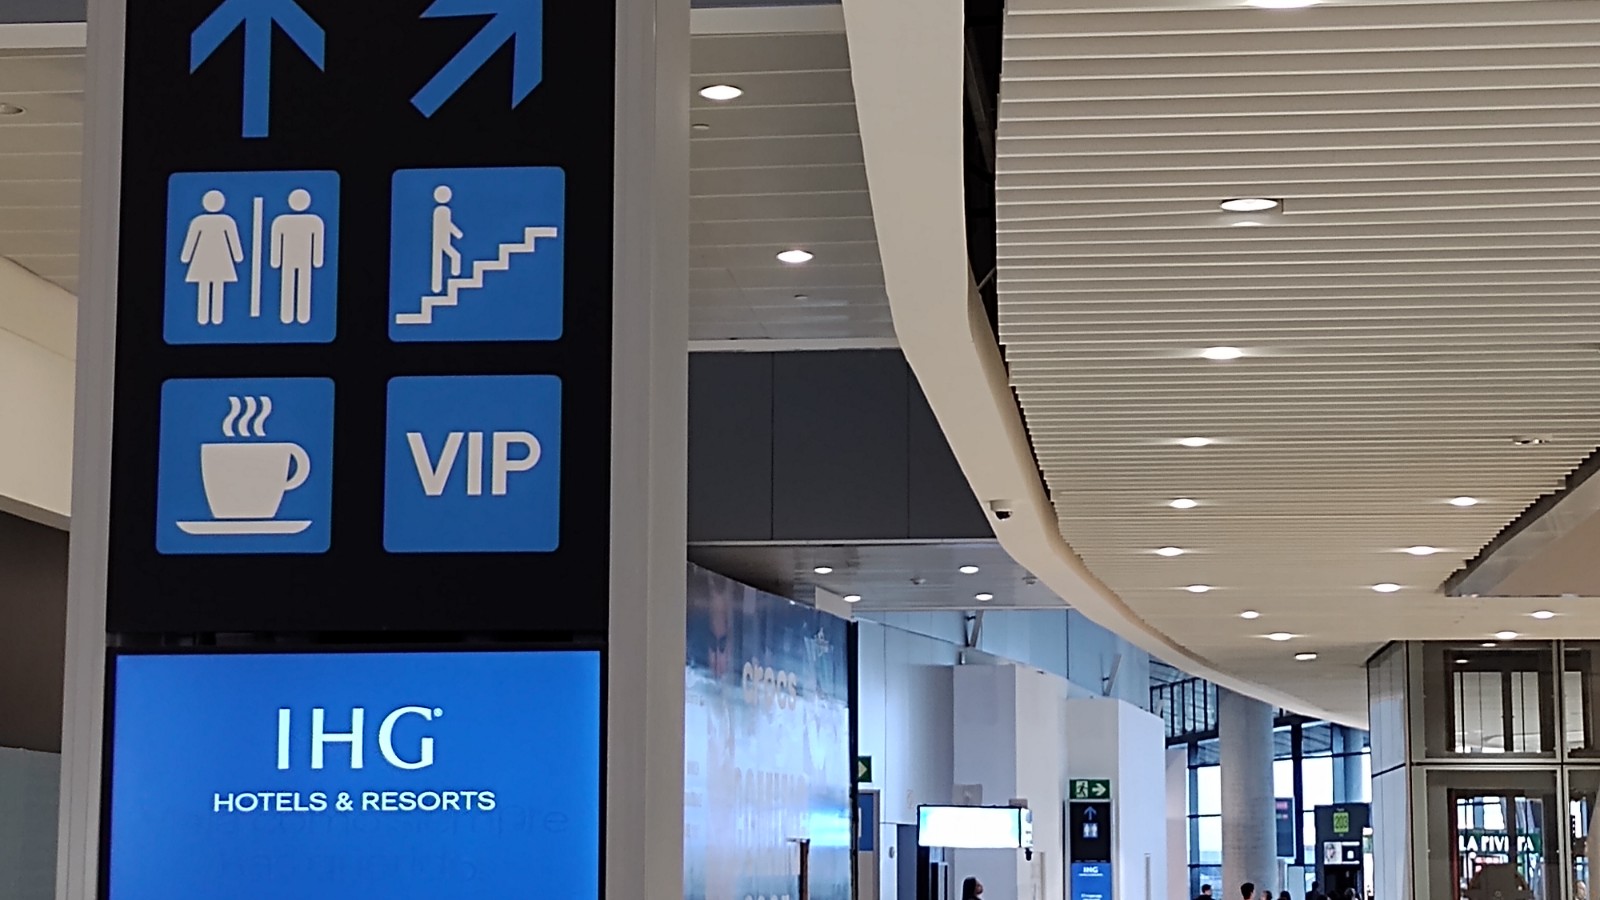 picture of the lobby sign in terminal 2 Panama airport showing the way to the lounge.